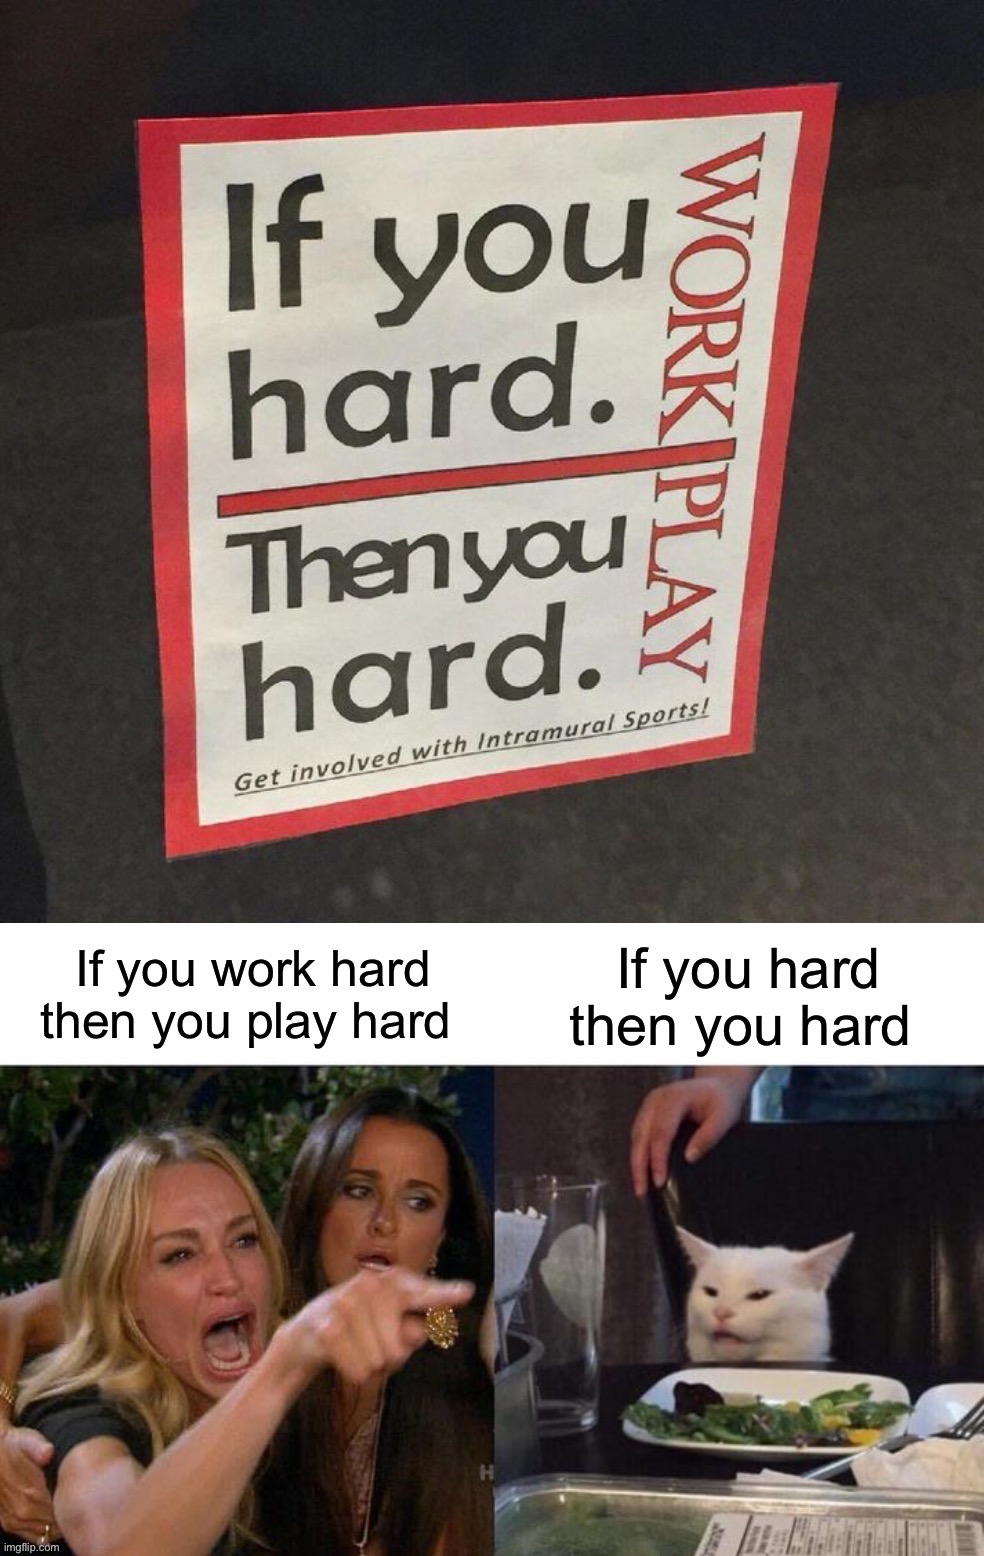 If you hard then you hard | image tagged in memes,funny,hard,funny signs,oop,wtf | made w/ Imgflip meme maker